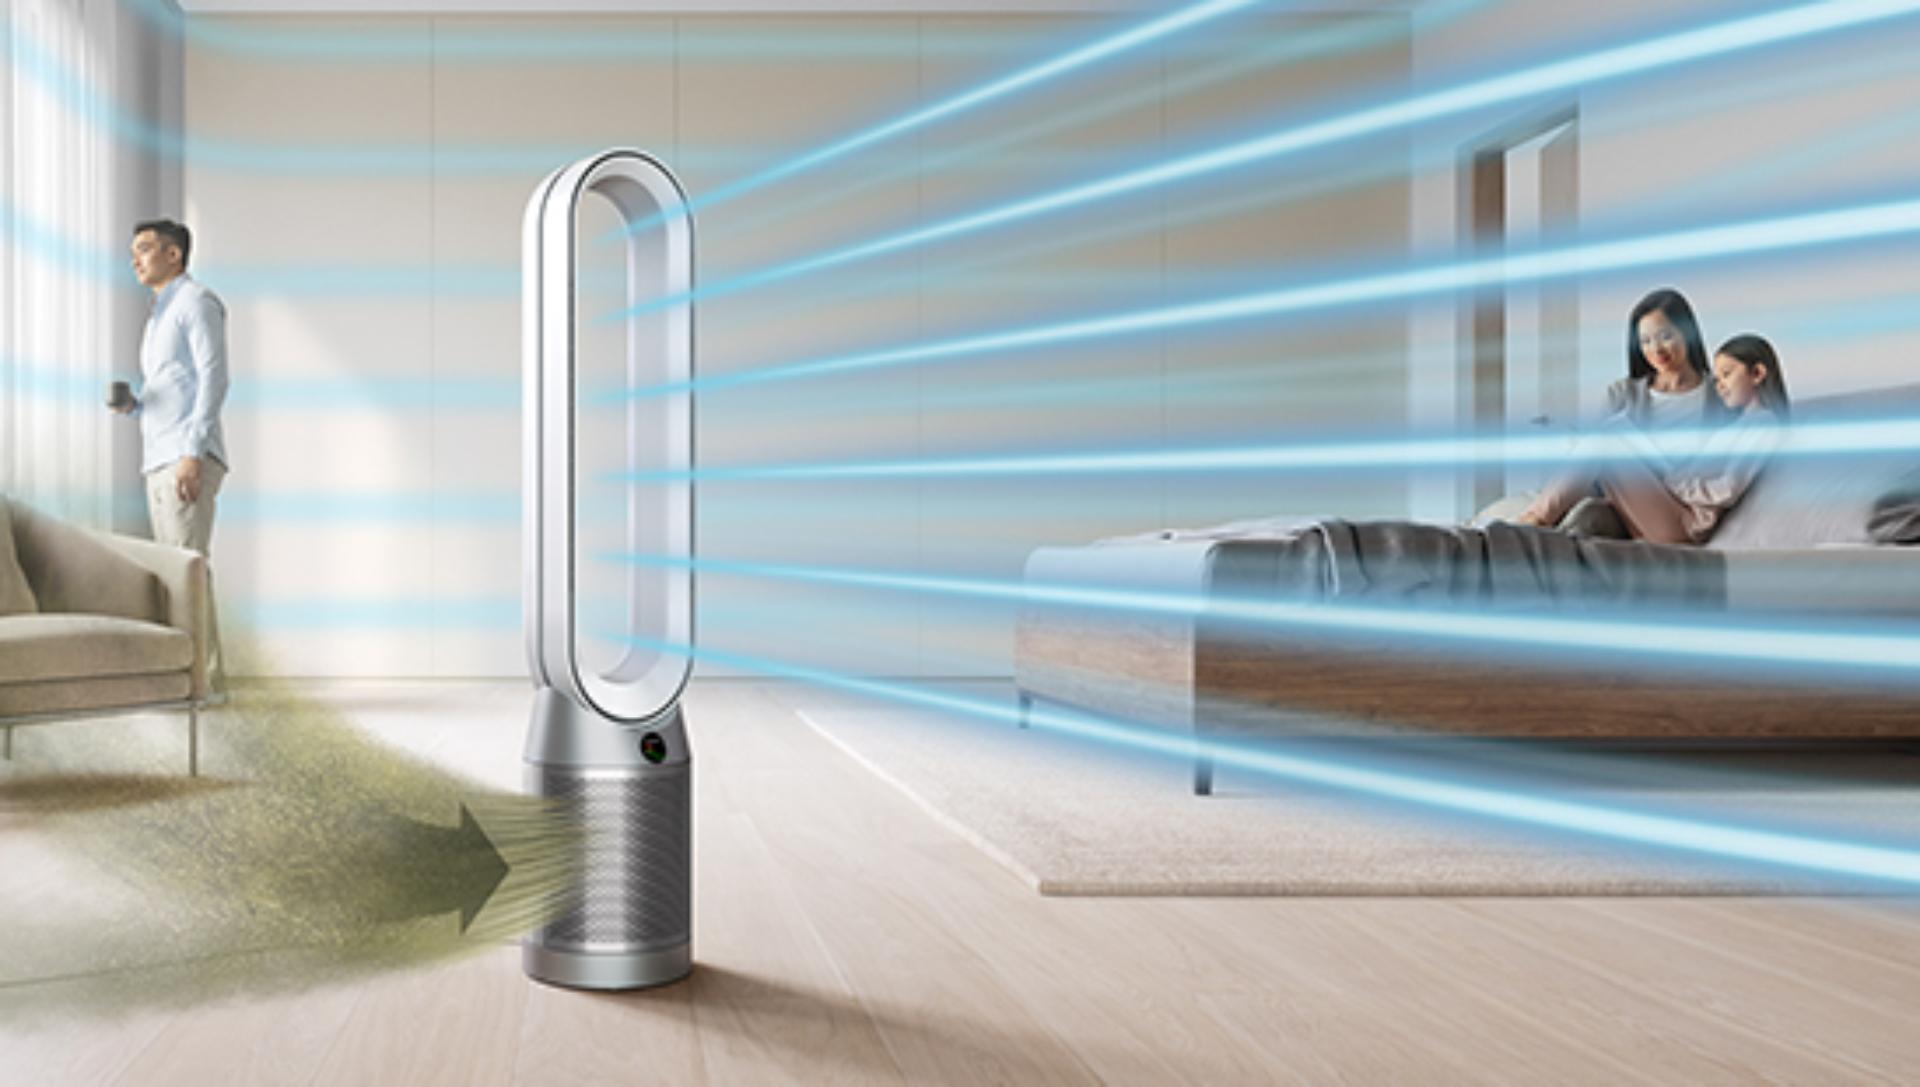 Dyson purifier in a living space